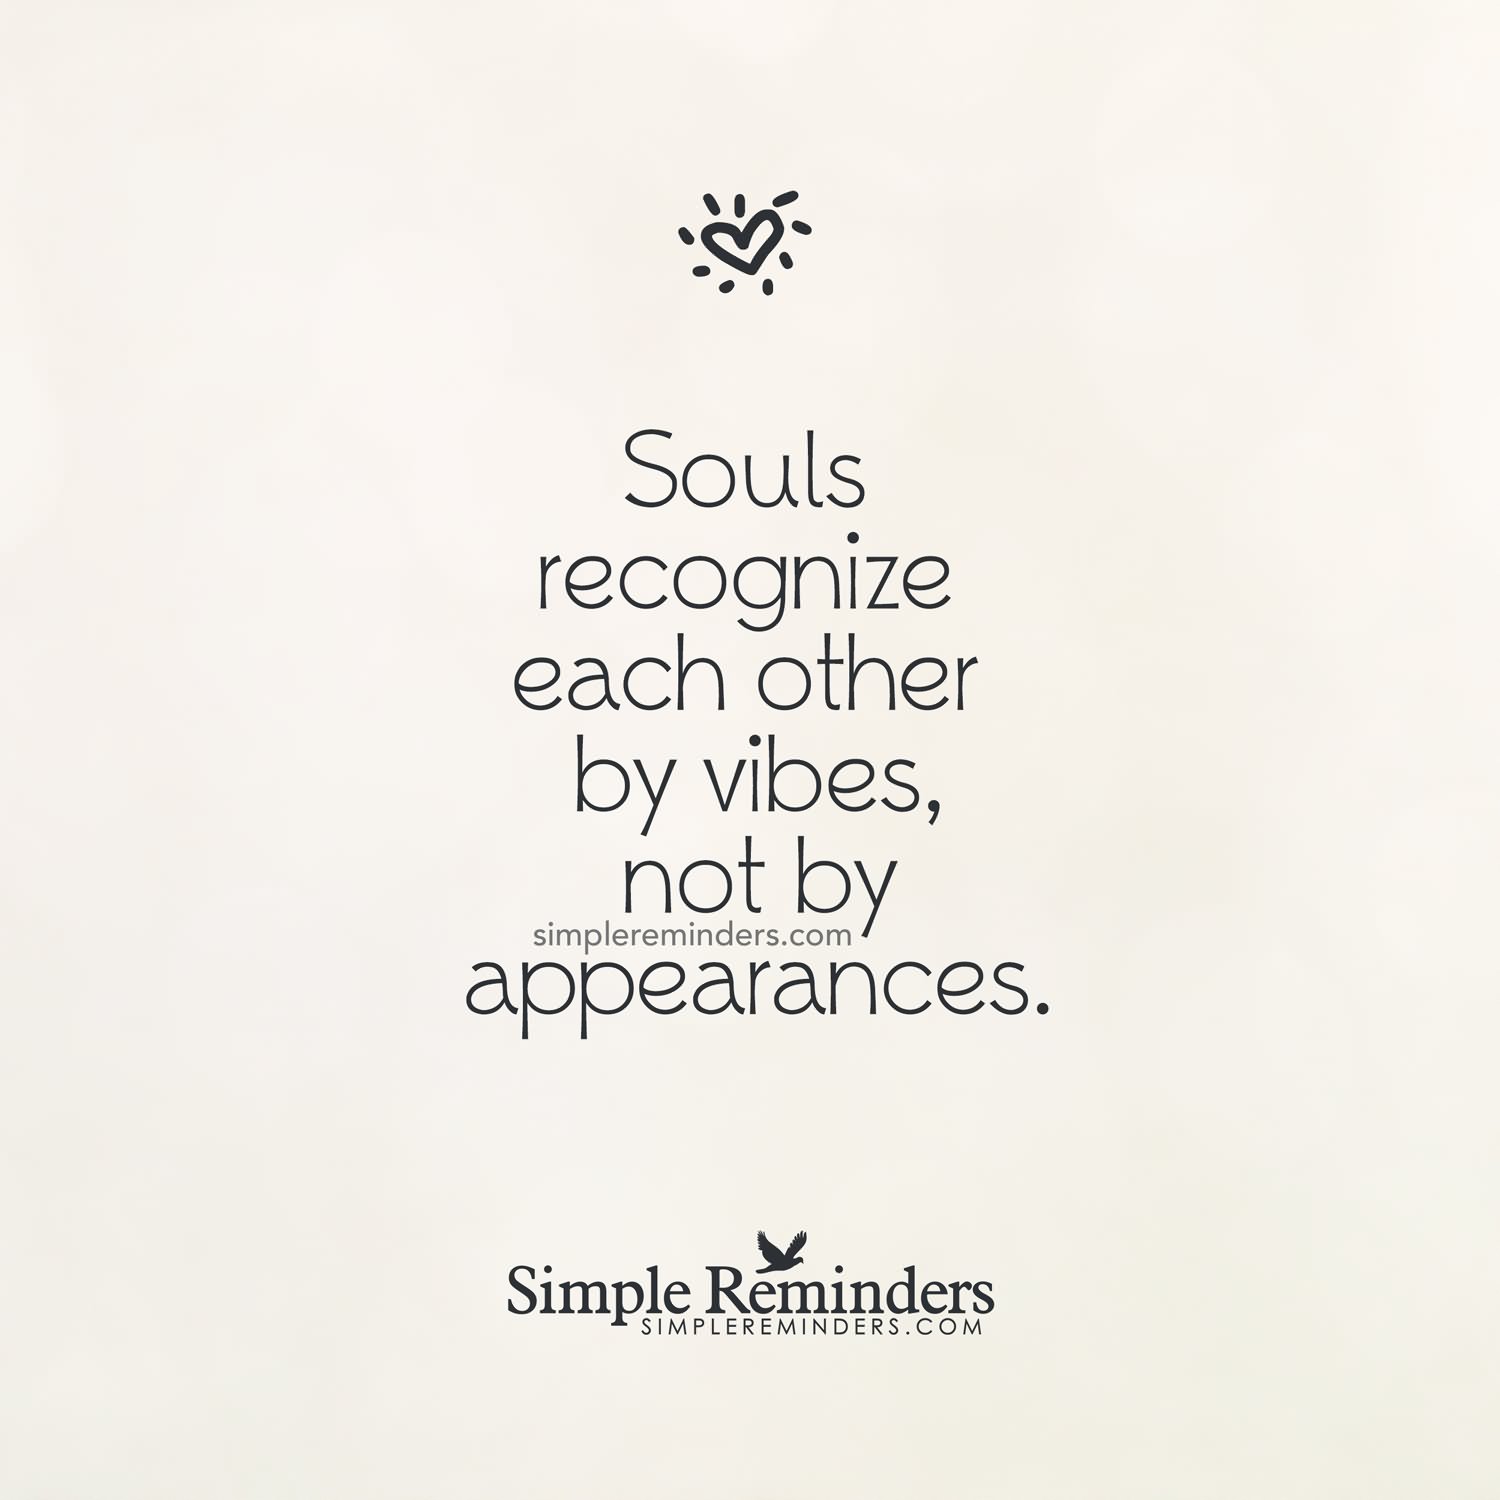 Souls recognize each other by vibes not by appearances